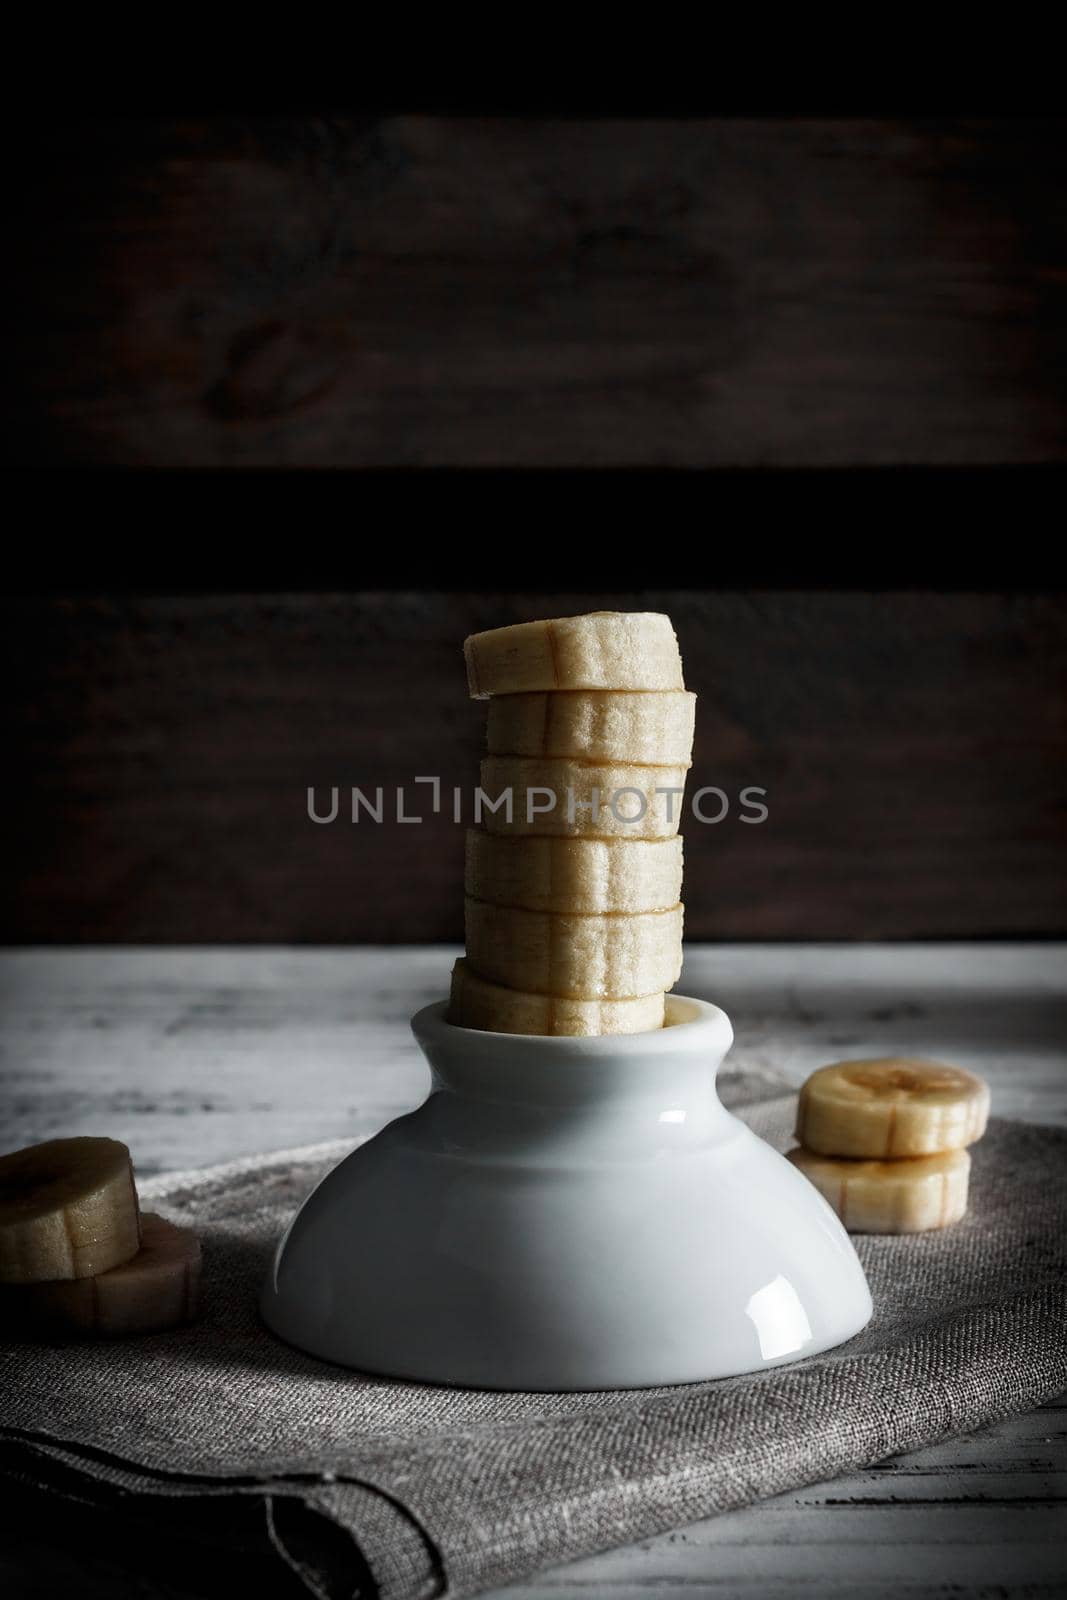 Delicious dessert of fresh sliced banana standing on a white bowl with slices around on a sackcloth and wooden background. Vertical image of dark mood style.